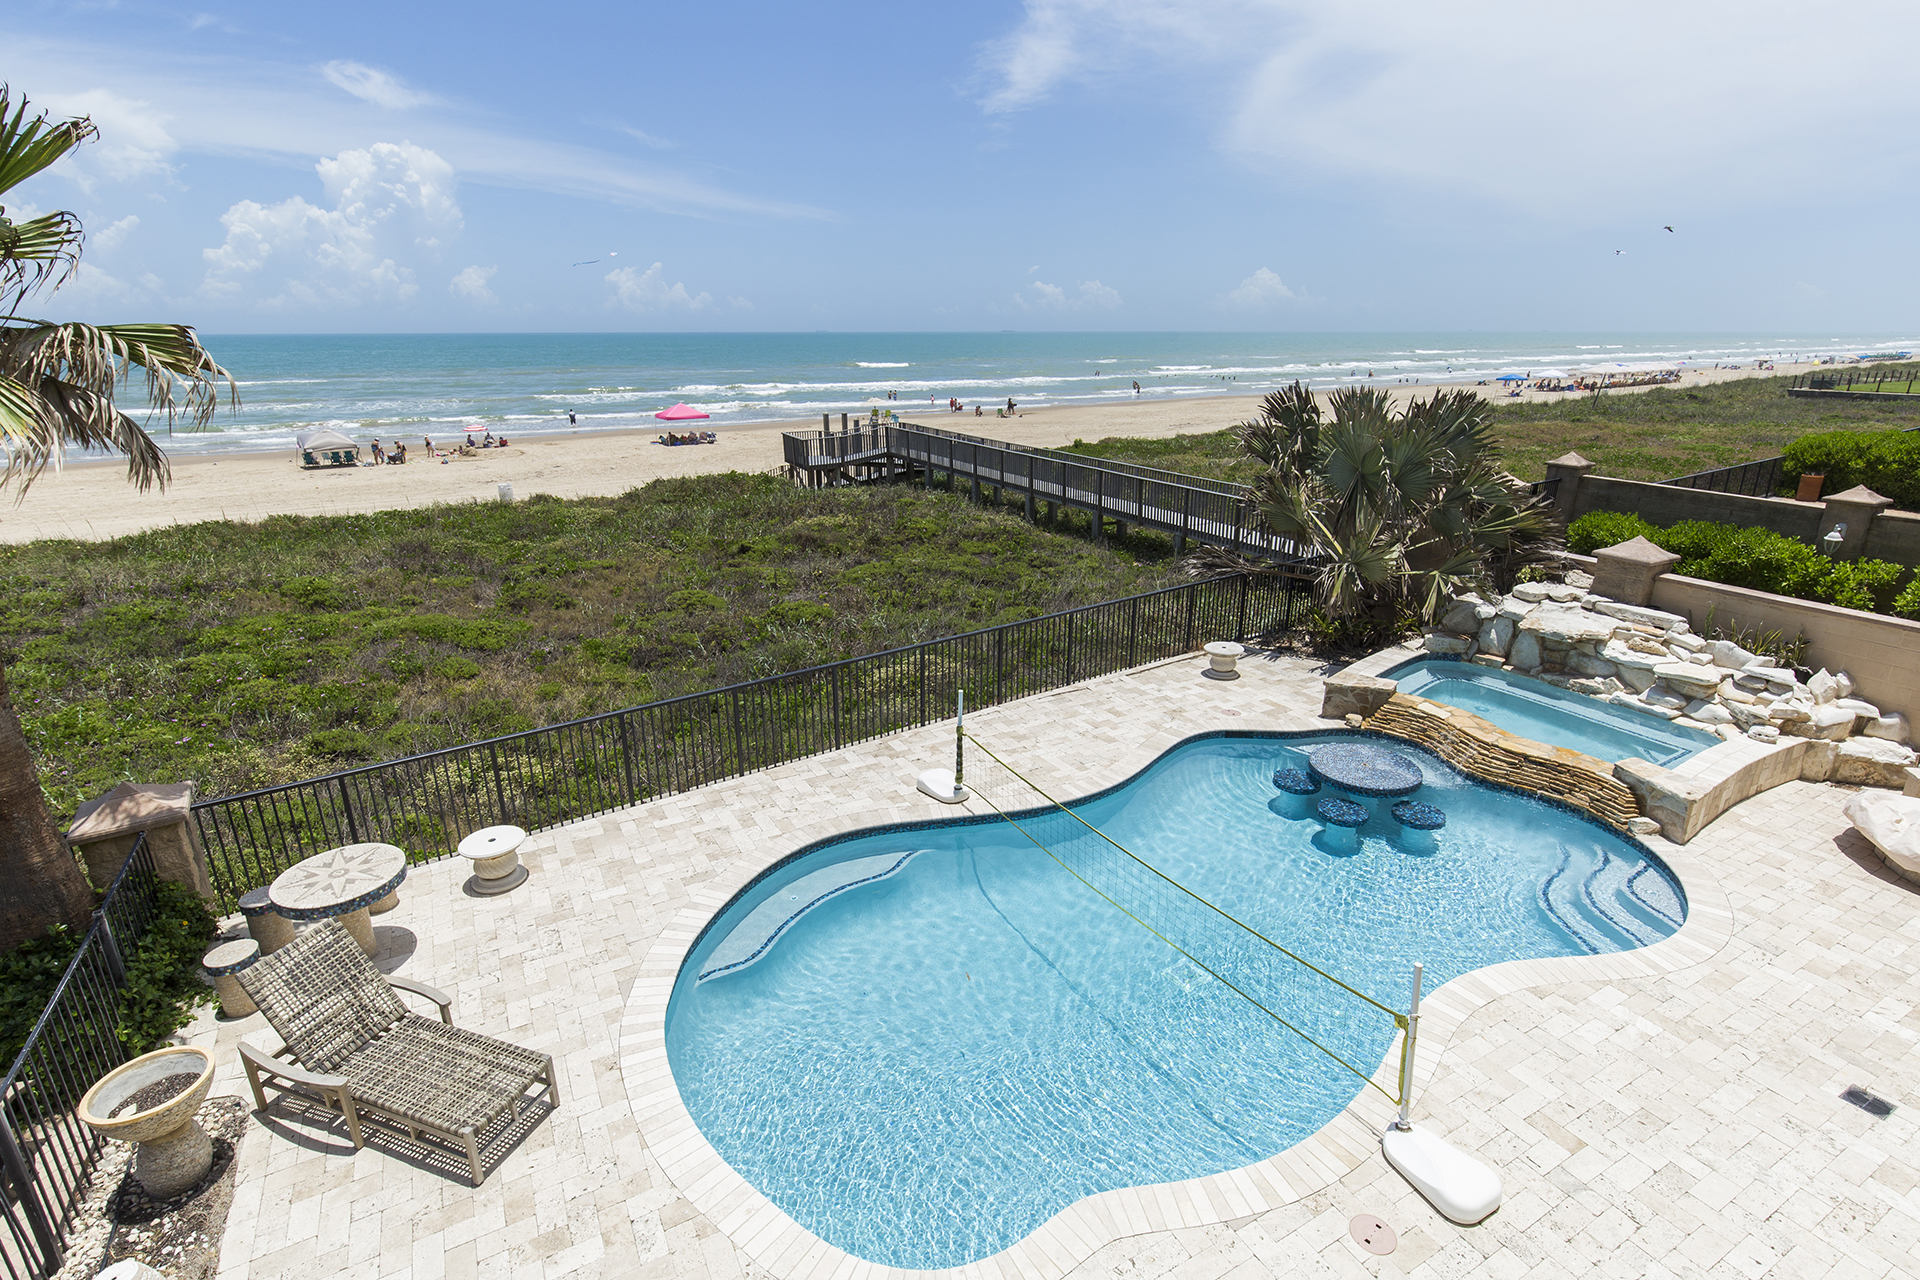 6500 Beach Drive: 5 Bedroom Pool Private Beachfront Vacation Home 6500 Beach Drive South Padre Island